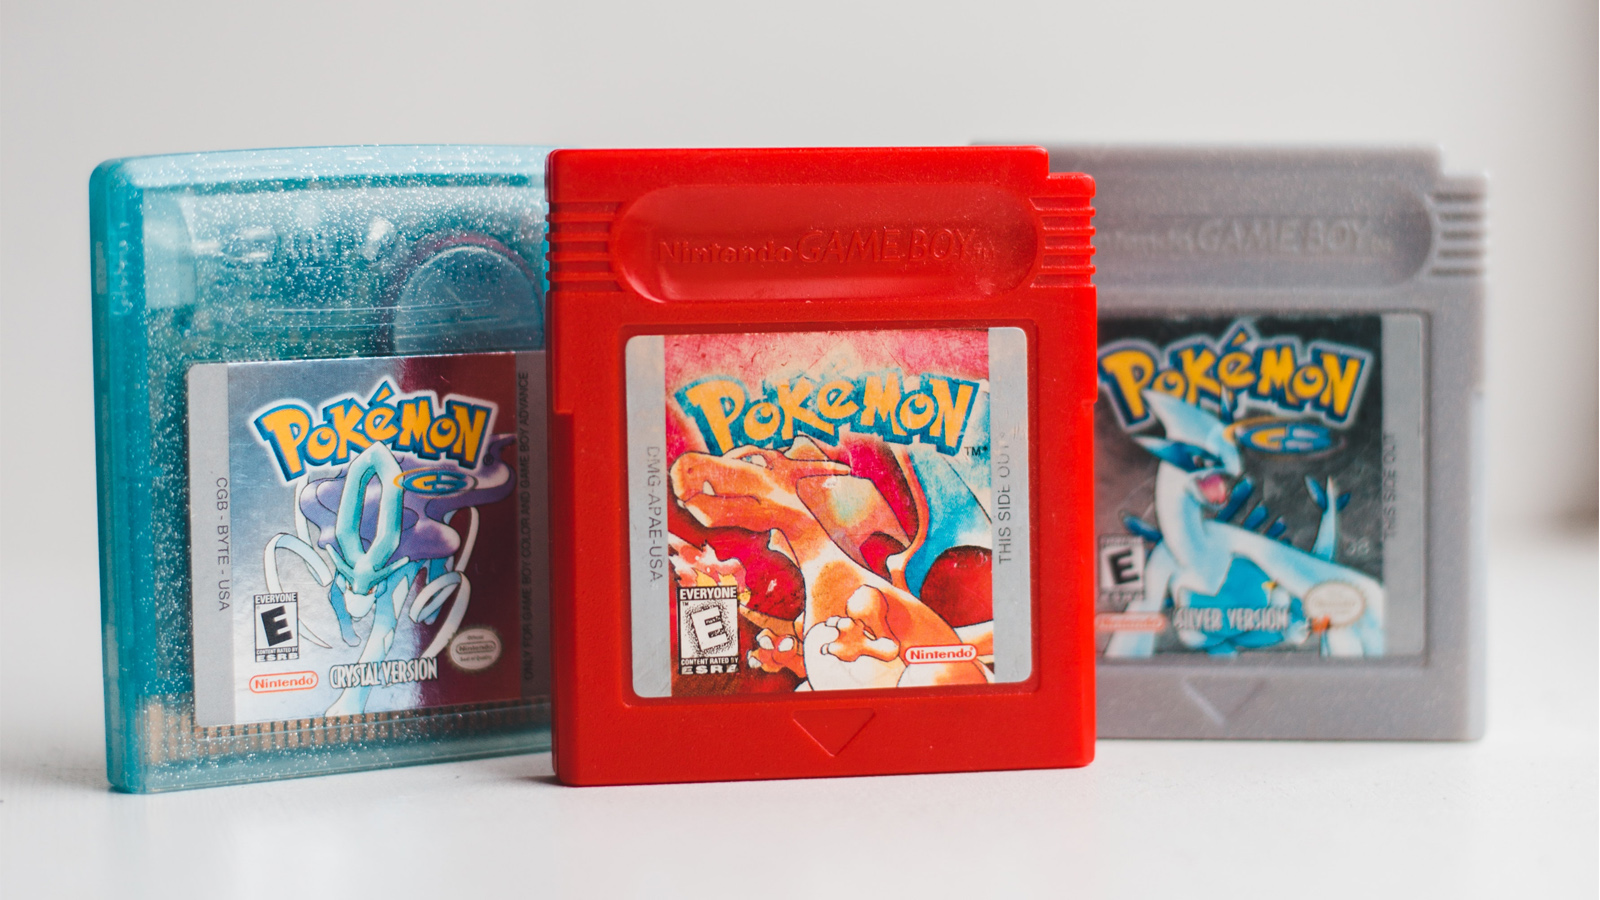 Best-selling Pokemon games of all time: Top 10 compilation